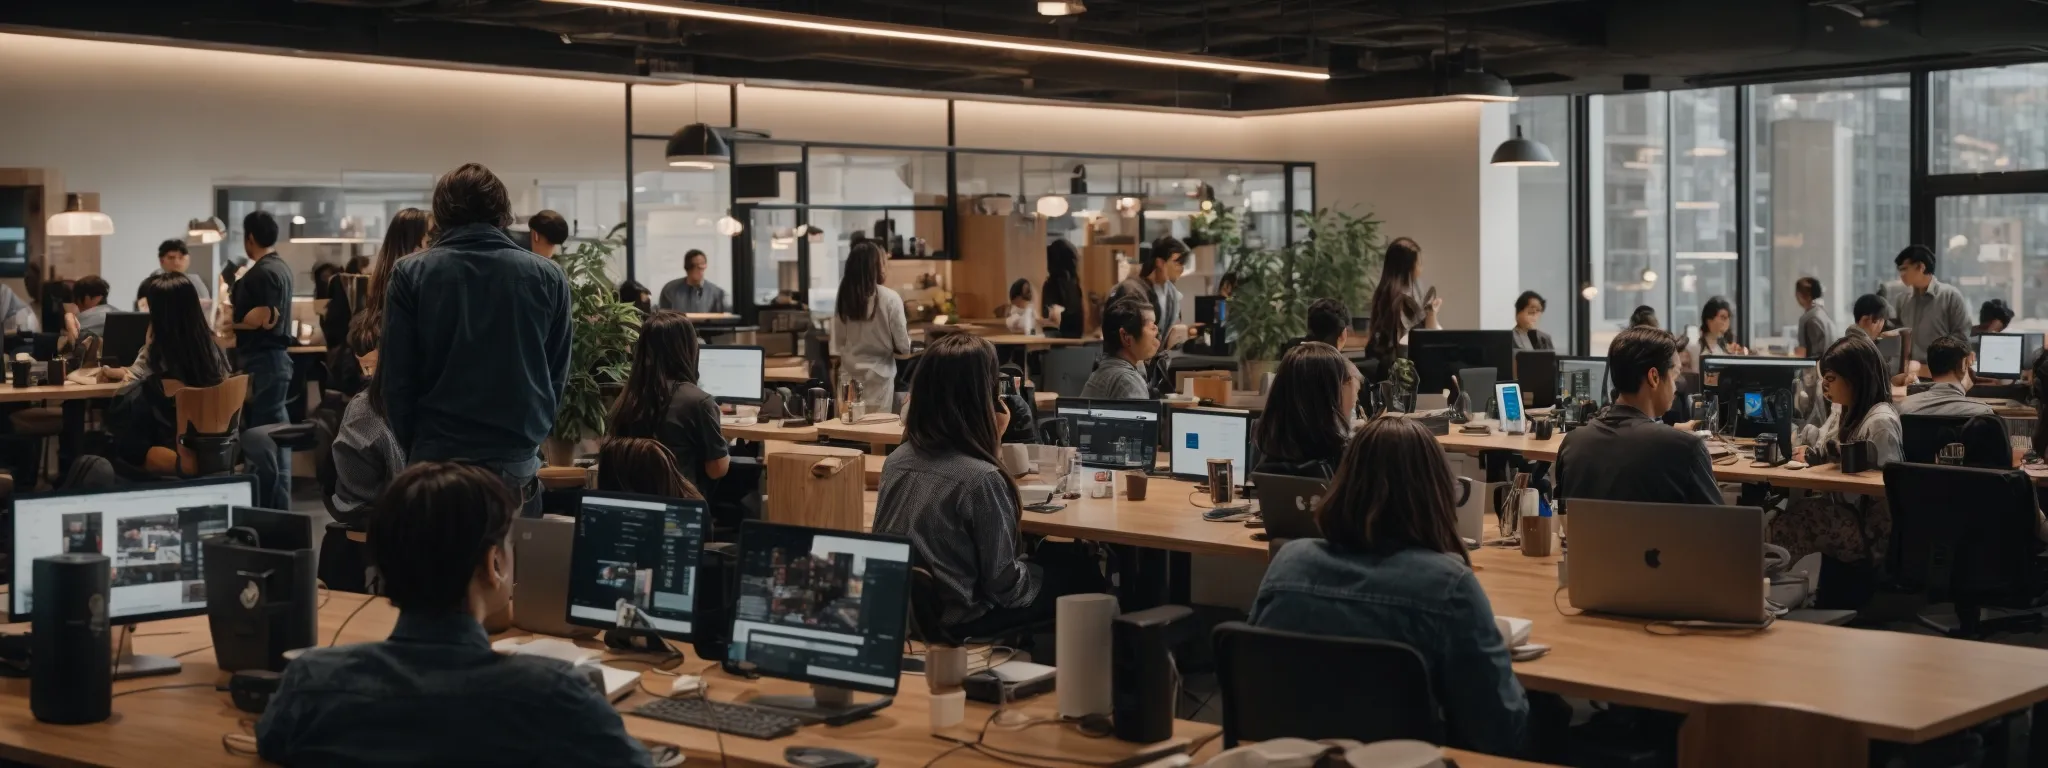 a modern, bustling wework office space filled with professionals engaged in collaborative work on laptops and digital devices.